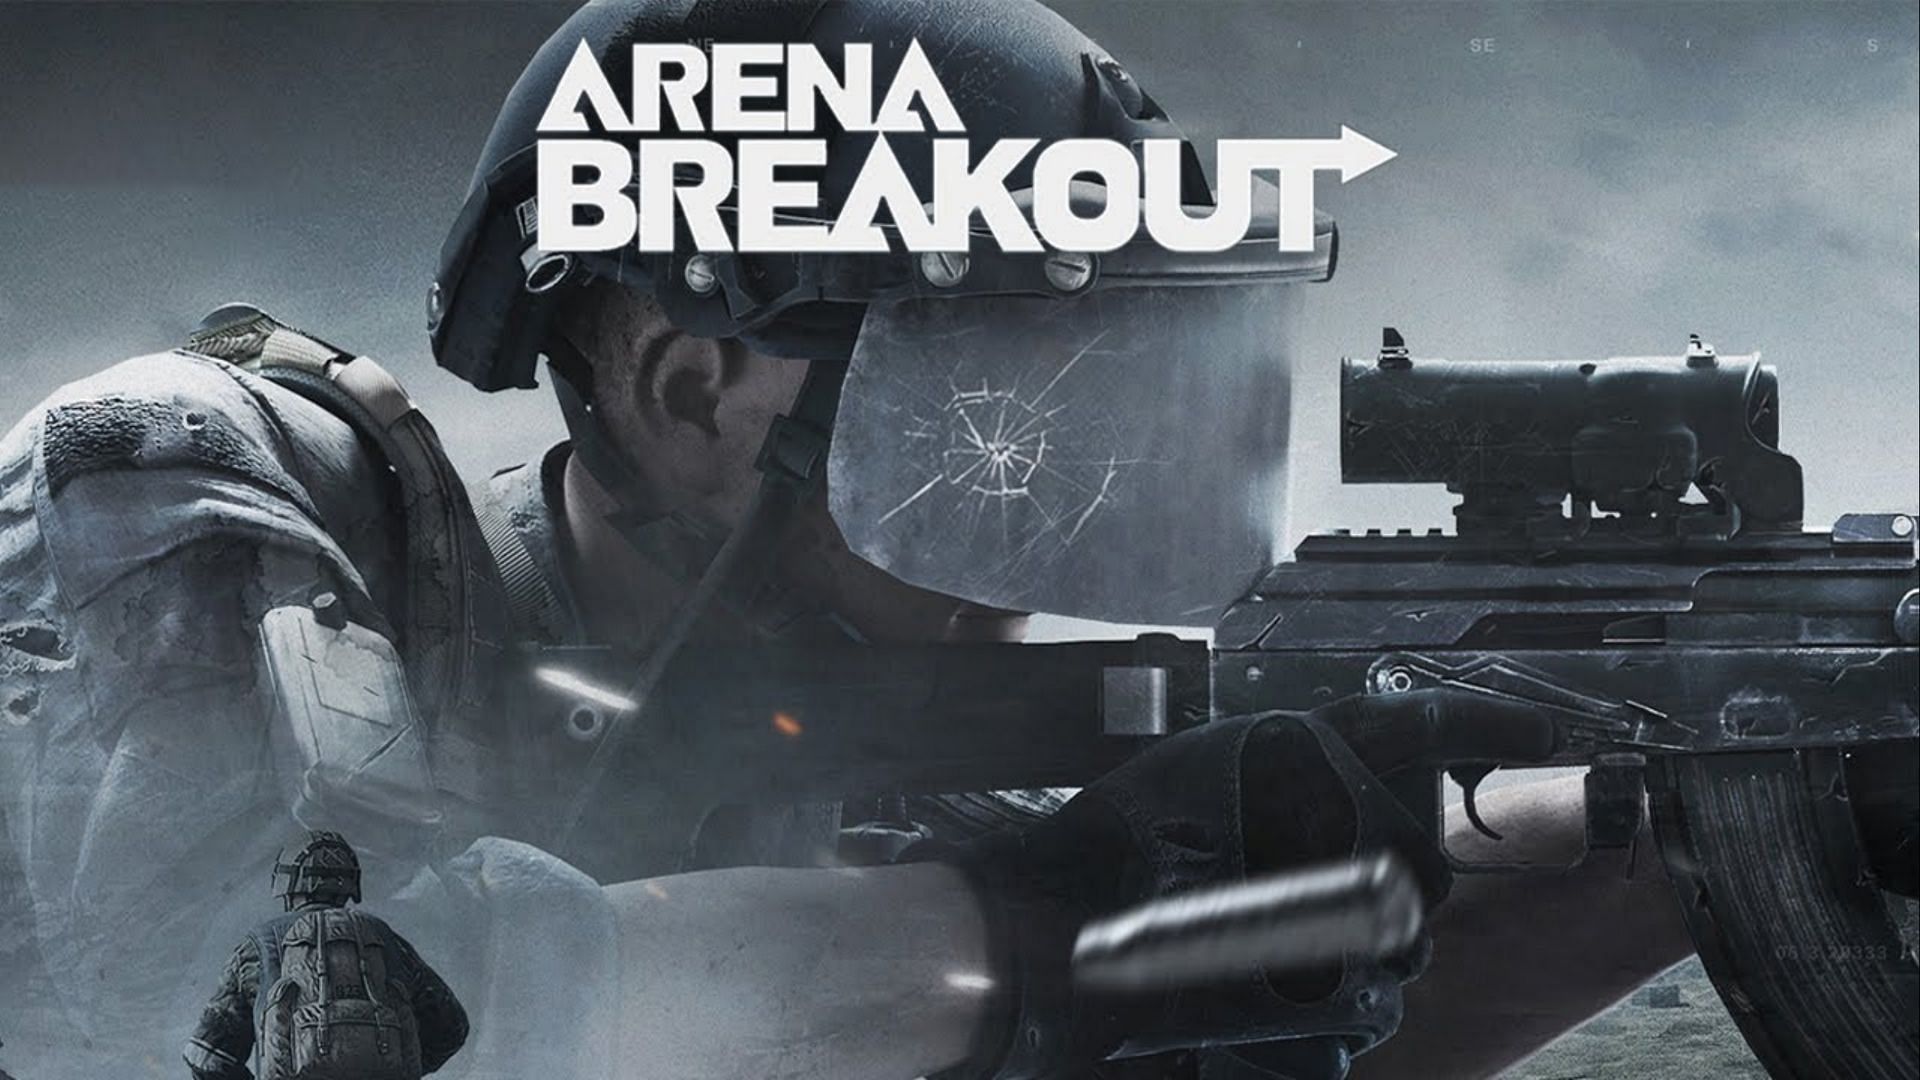 How does Arena Breakout feel and look on mobile devices?